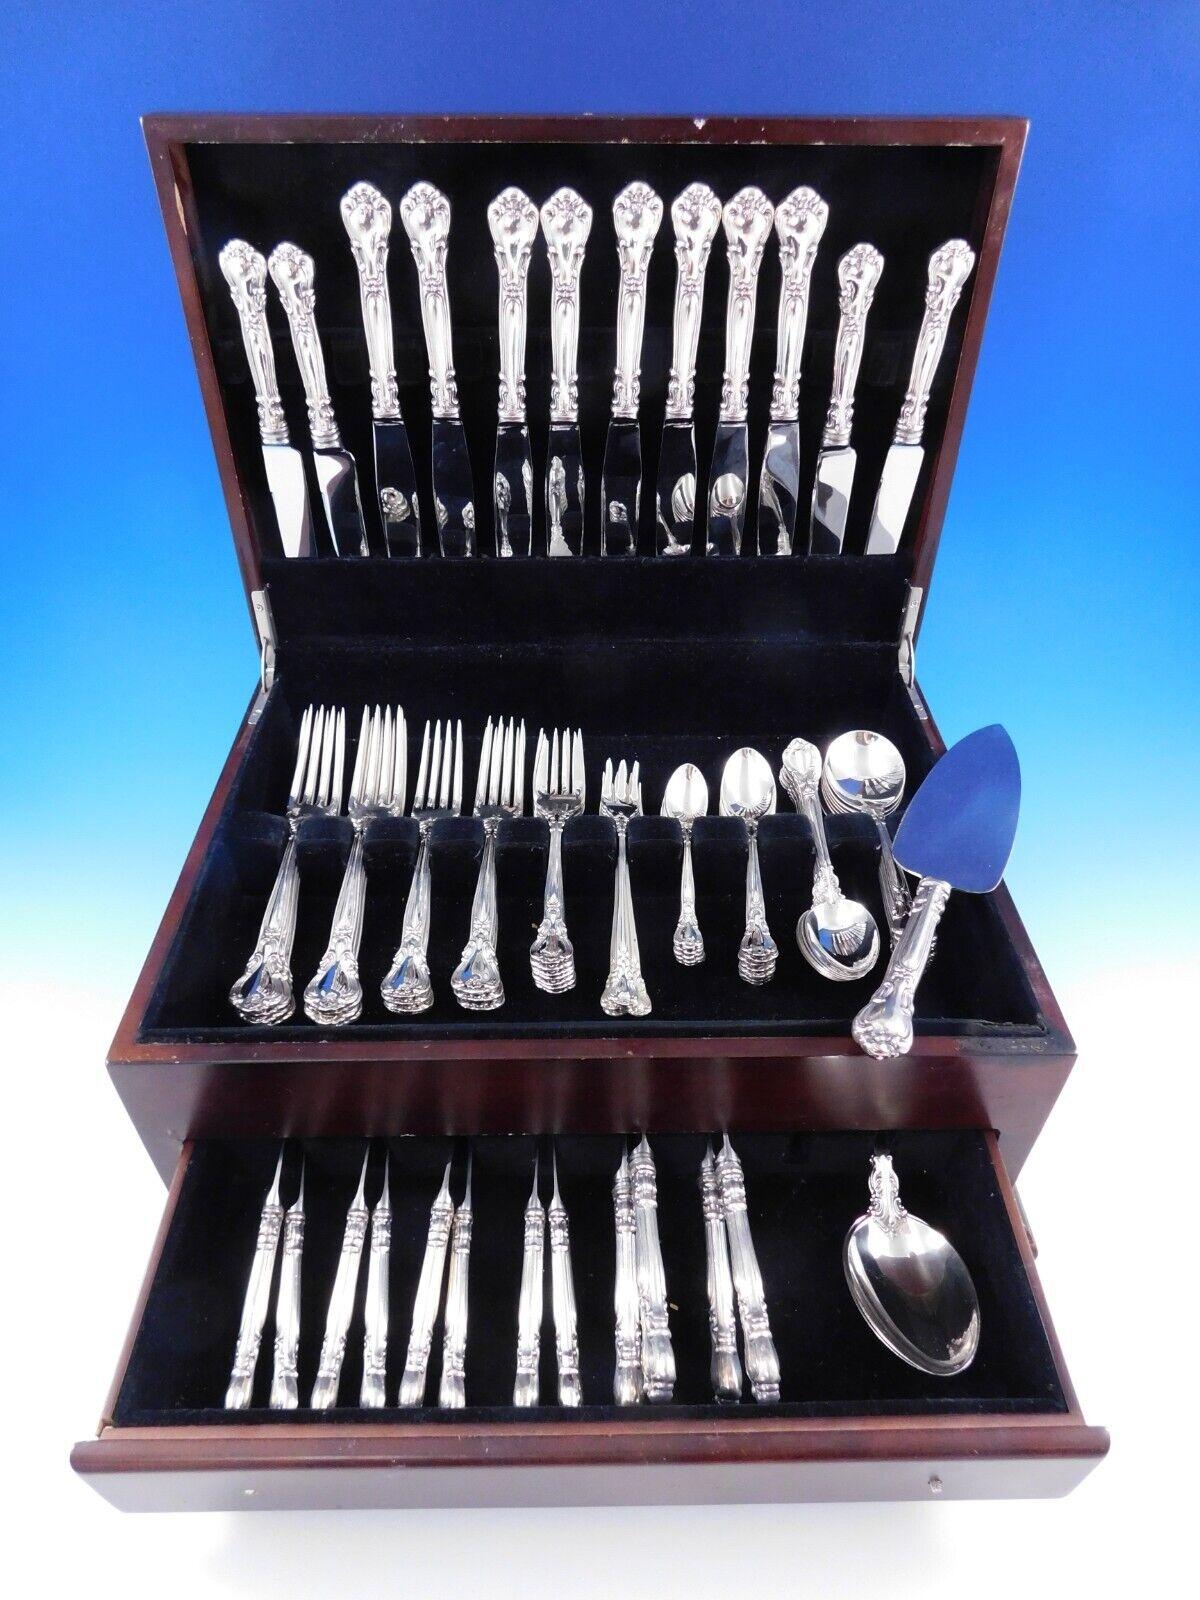 Exquisite Chantilly by Birks (Canada) dinner and luncheon size sterling silver Flatware set - 92 pieces. This set includes:

8 Dinner Size Knives, 9 1/2